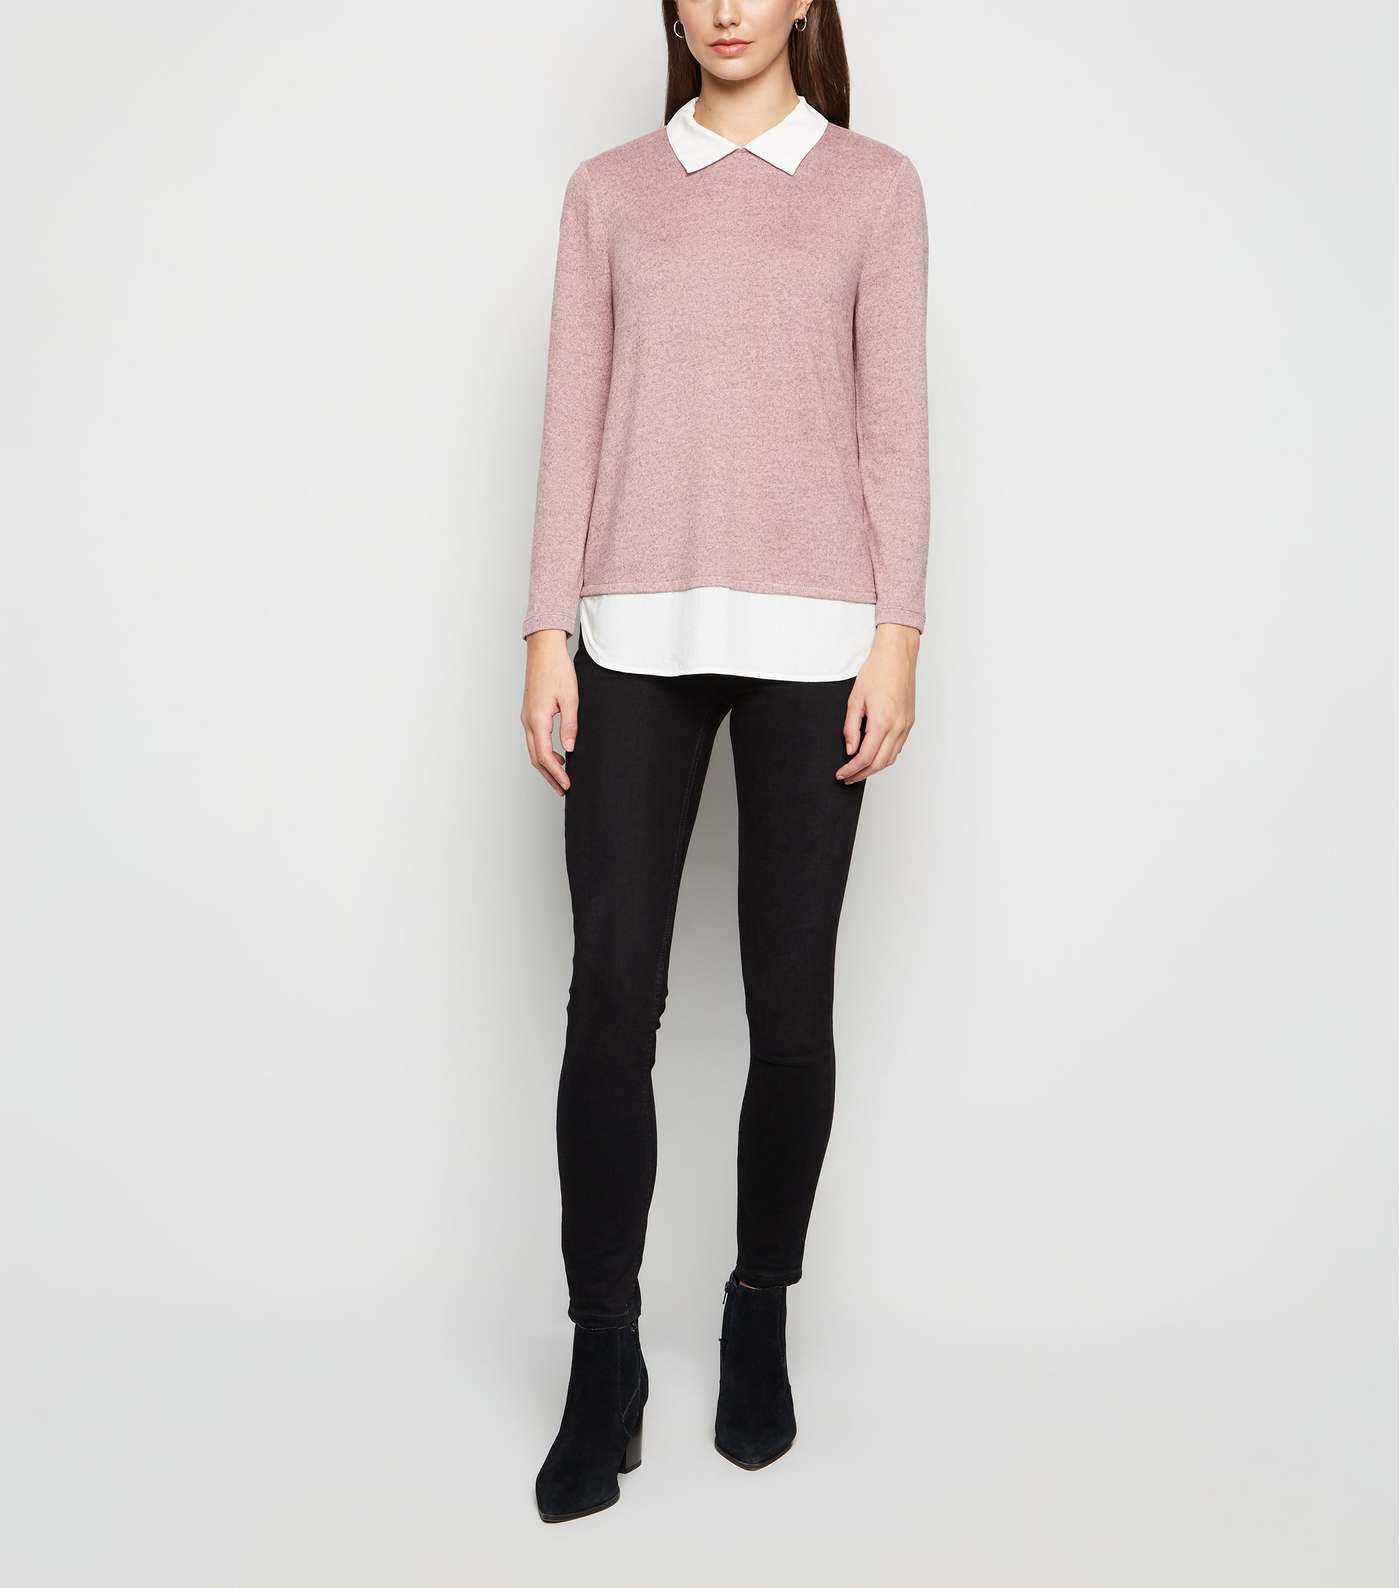 JDY Pink 2 In 1 Collared Jumper Image 2